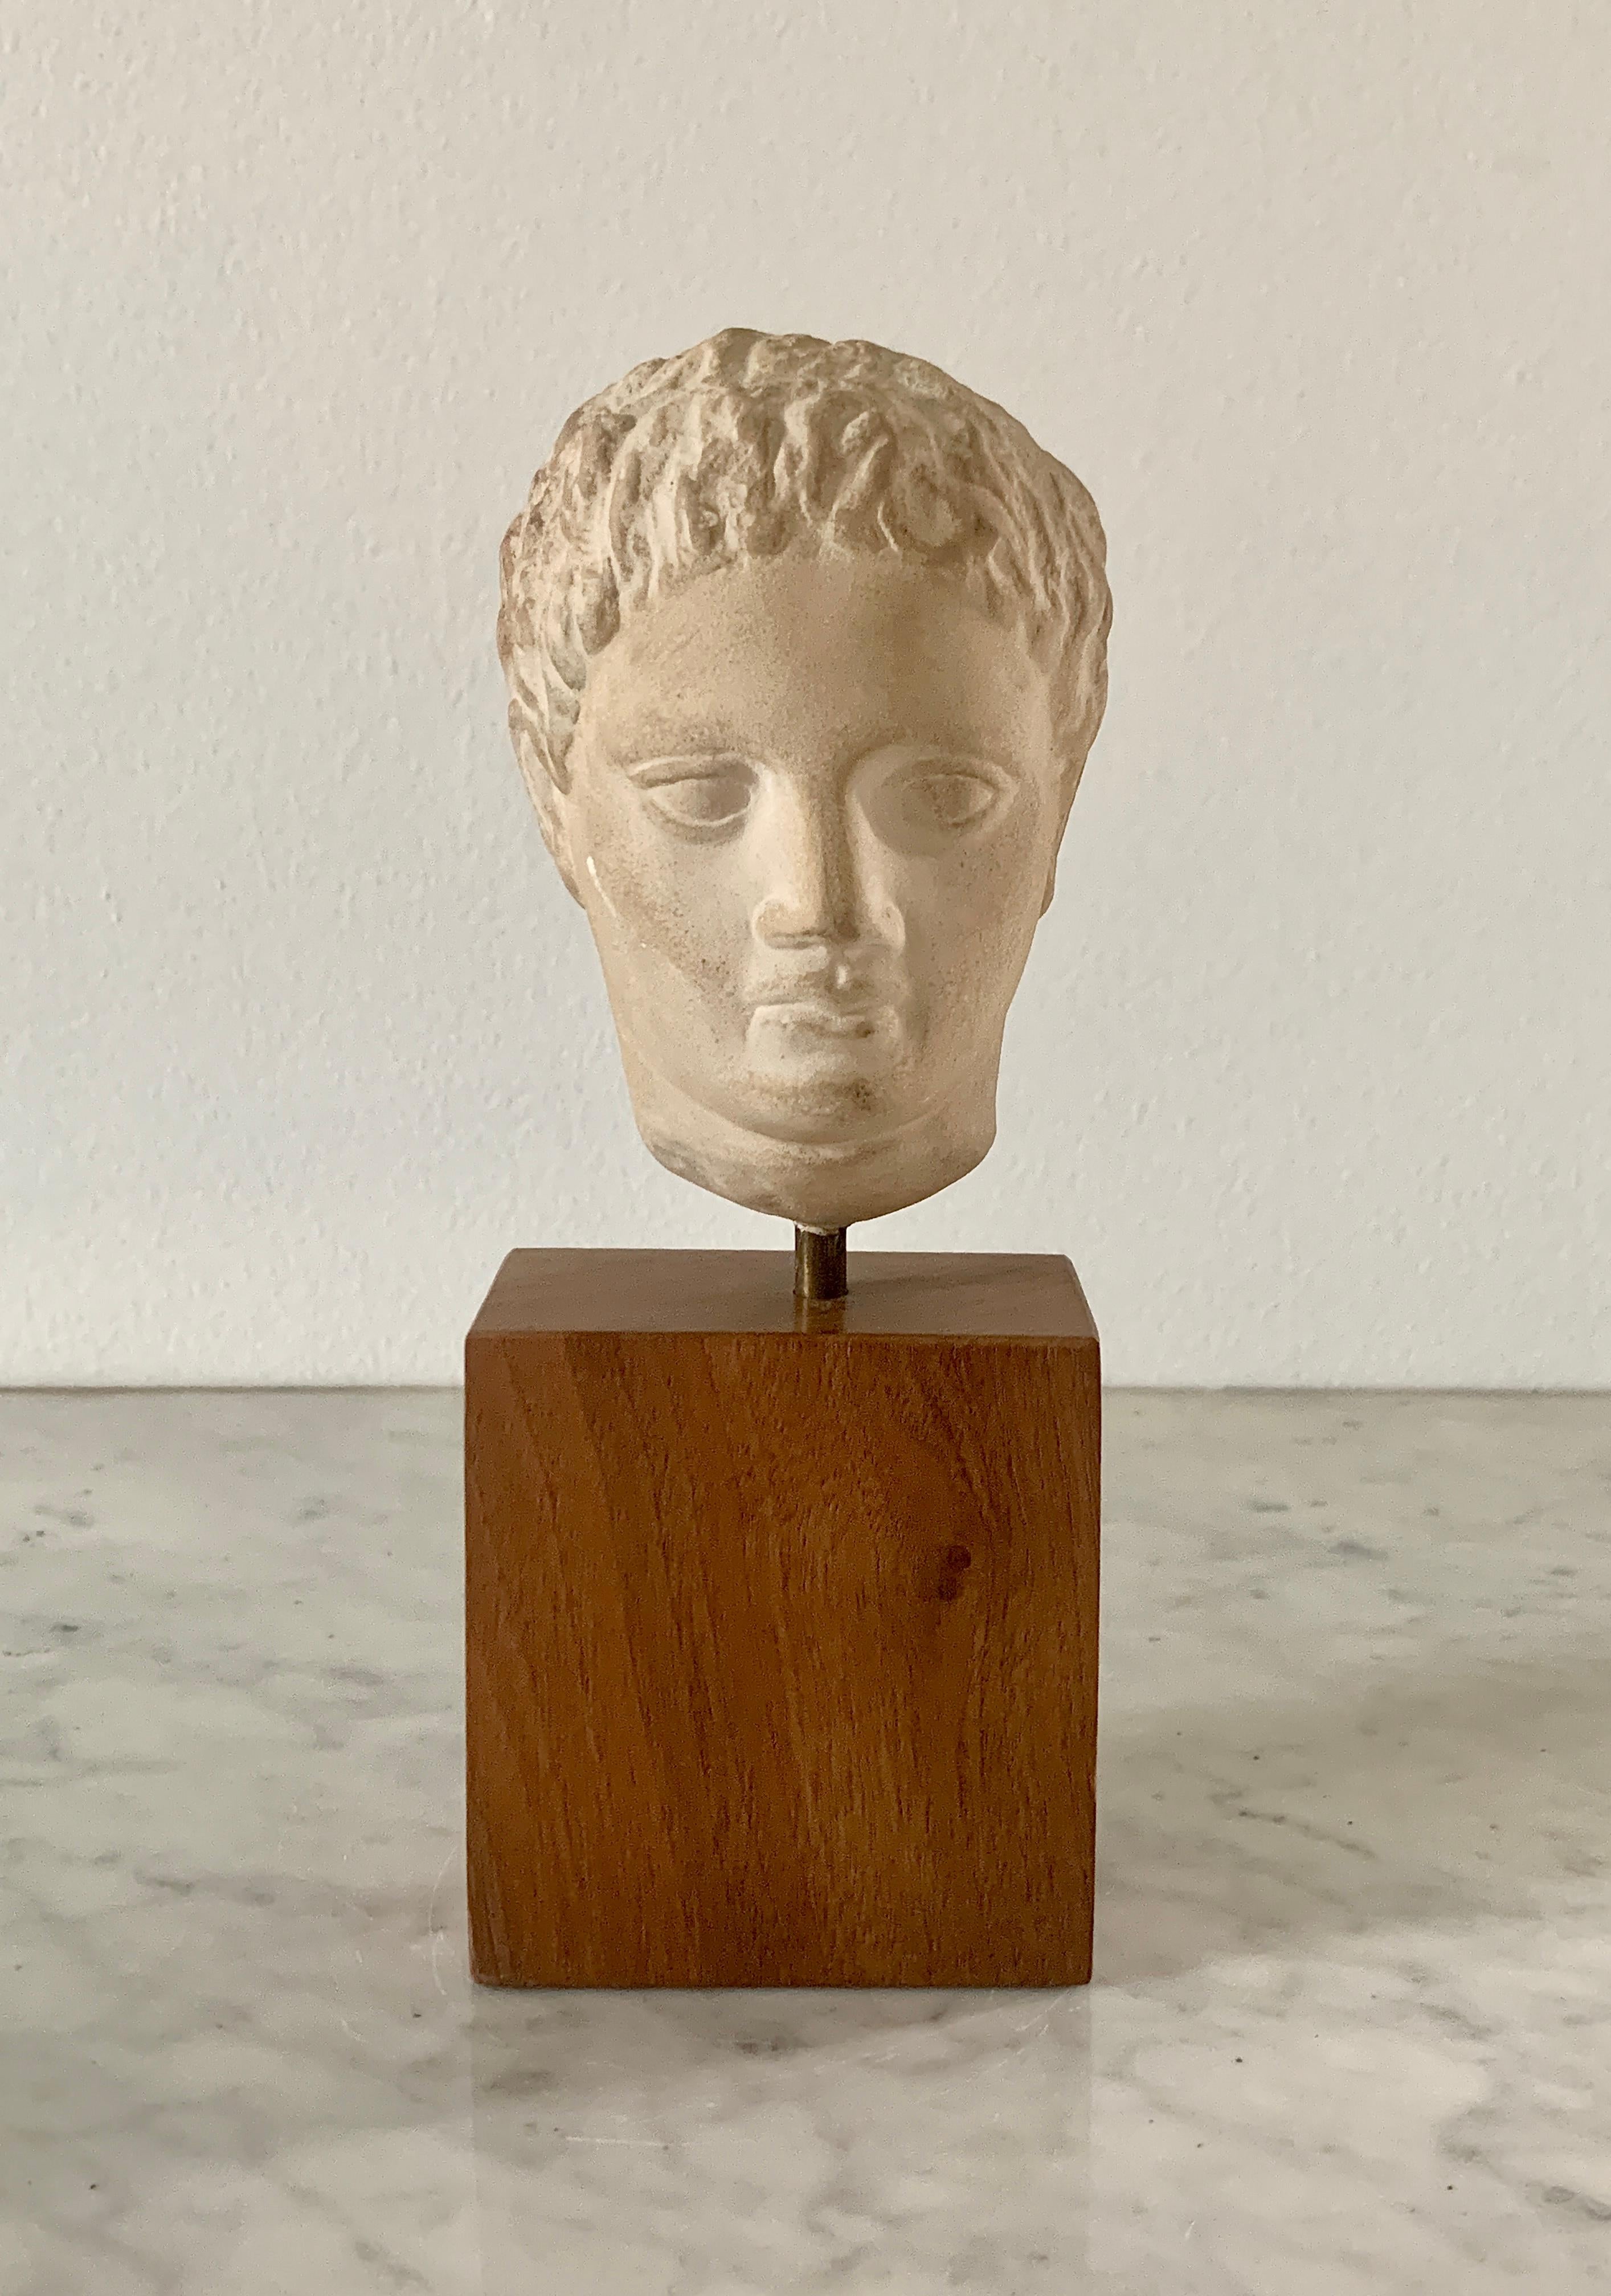 A gorgeous bust of Roman emperor Augustus.

Circa mid-20th century

Plaster bust on wood pedestal base

Measures: 2.88